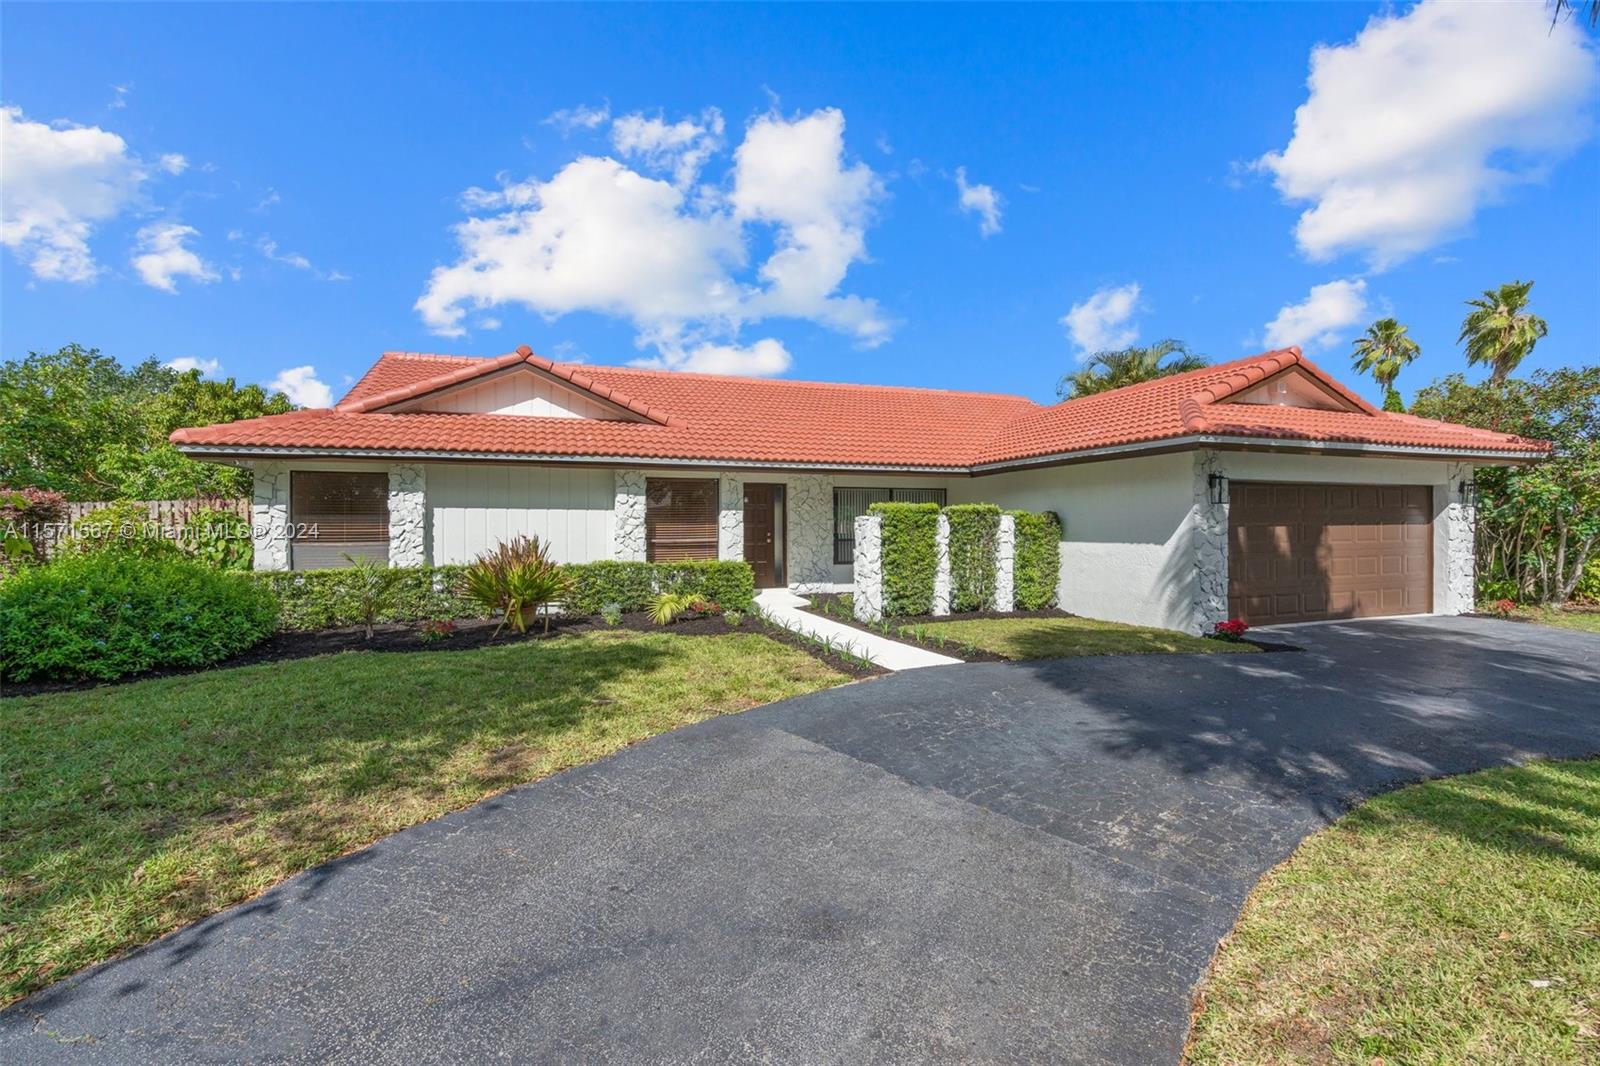 9726 Nw 20th St St, Coral Springs, Broward County, Florida - 4 Bedrooms  
2 Bathrooms - 